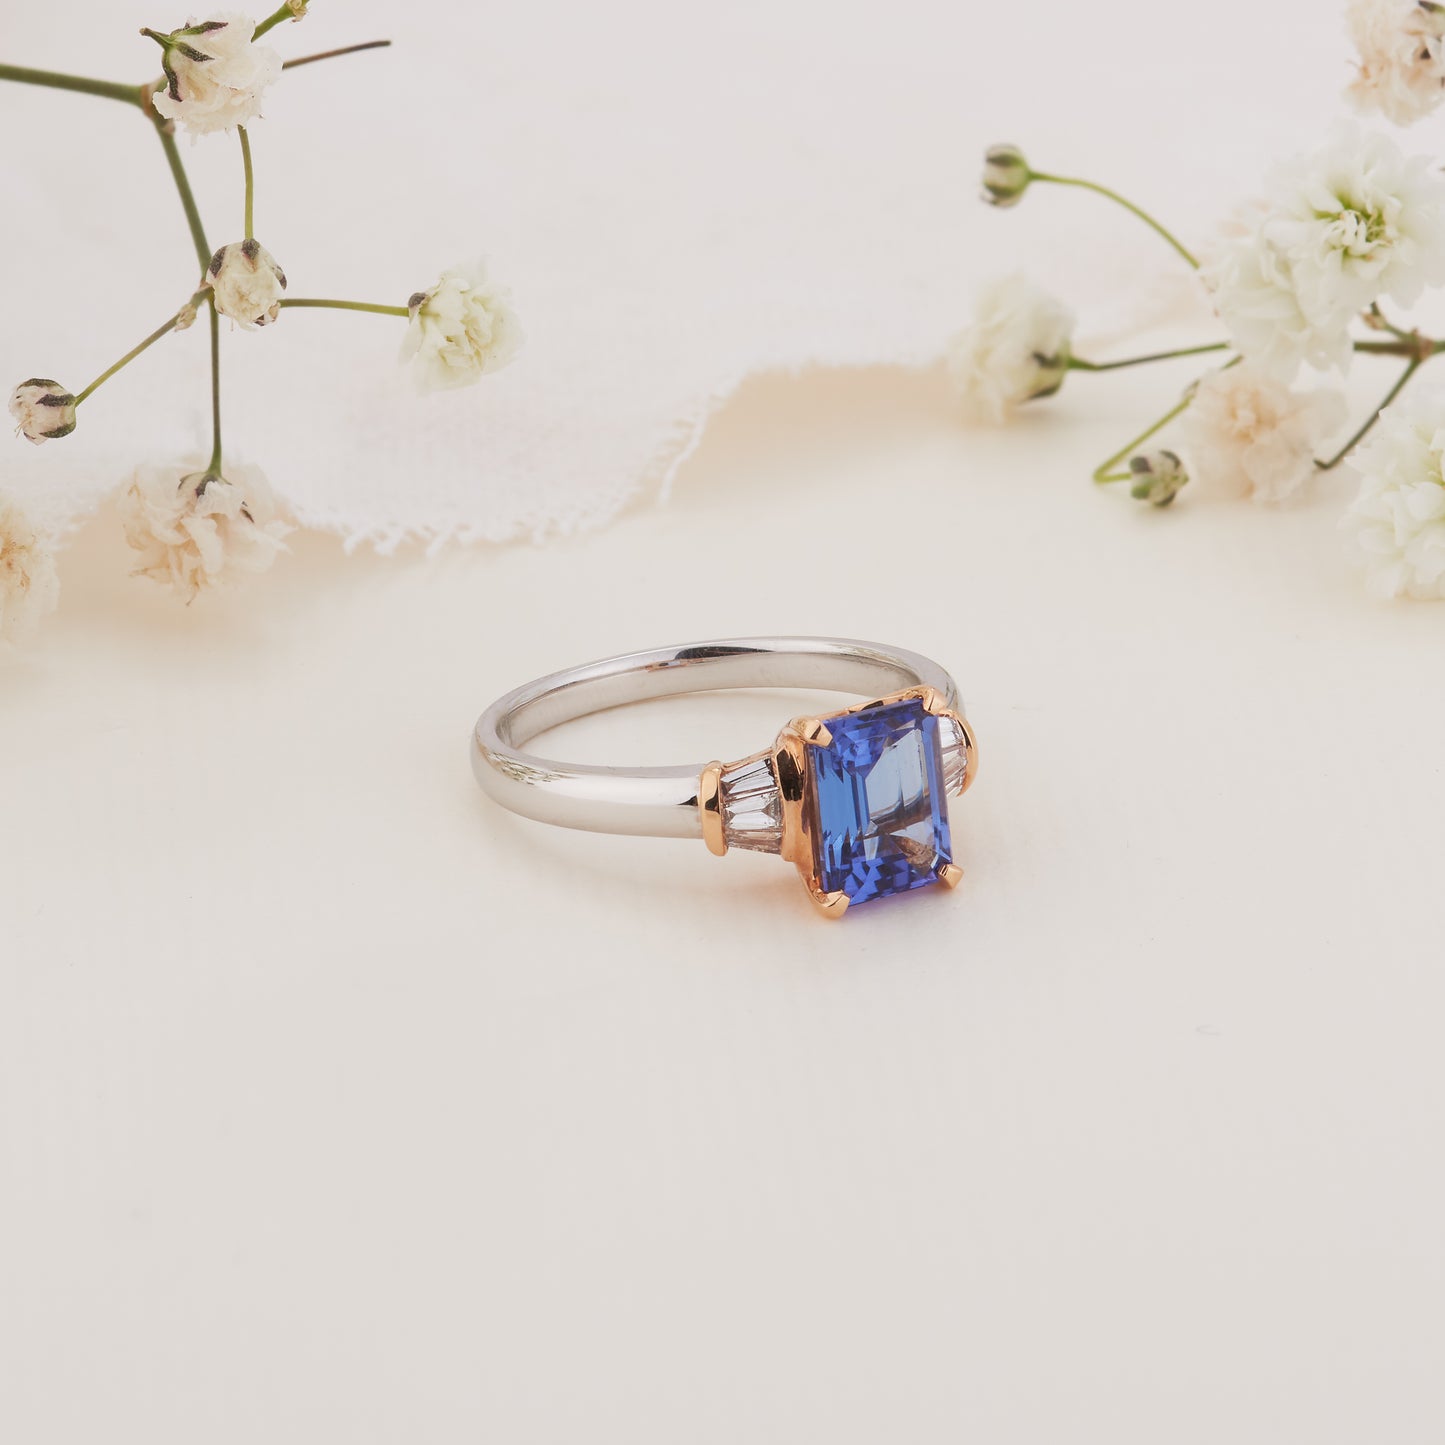 18K White and Rose Gold Emerald Cut Tanzanite and Baguette Diamond Ring 0.2tdw